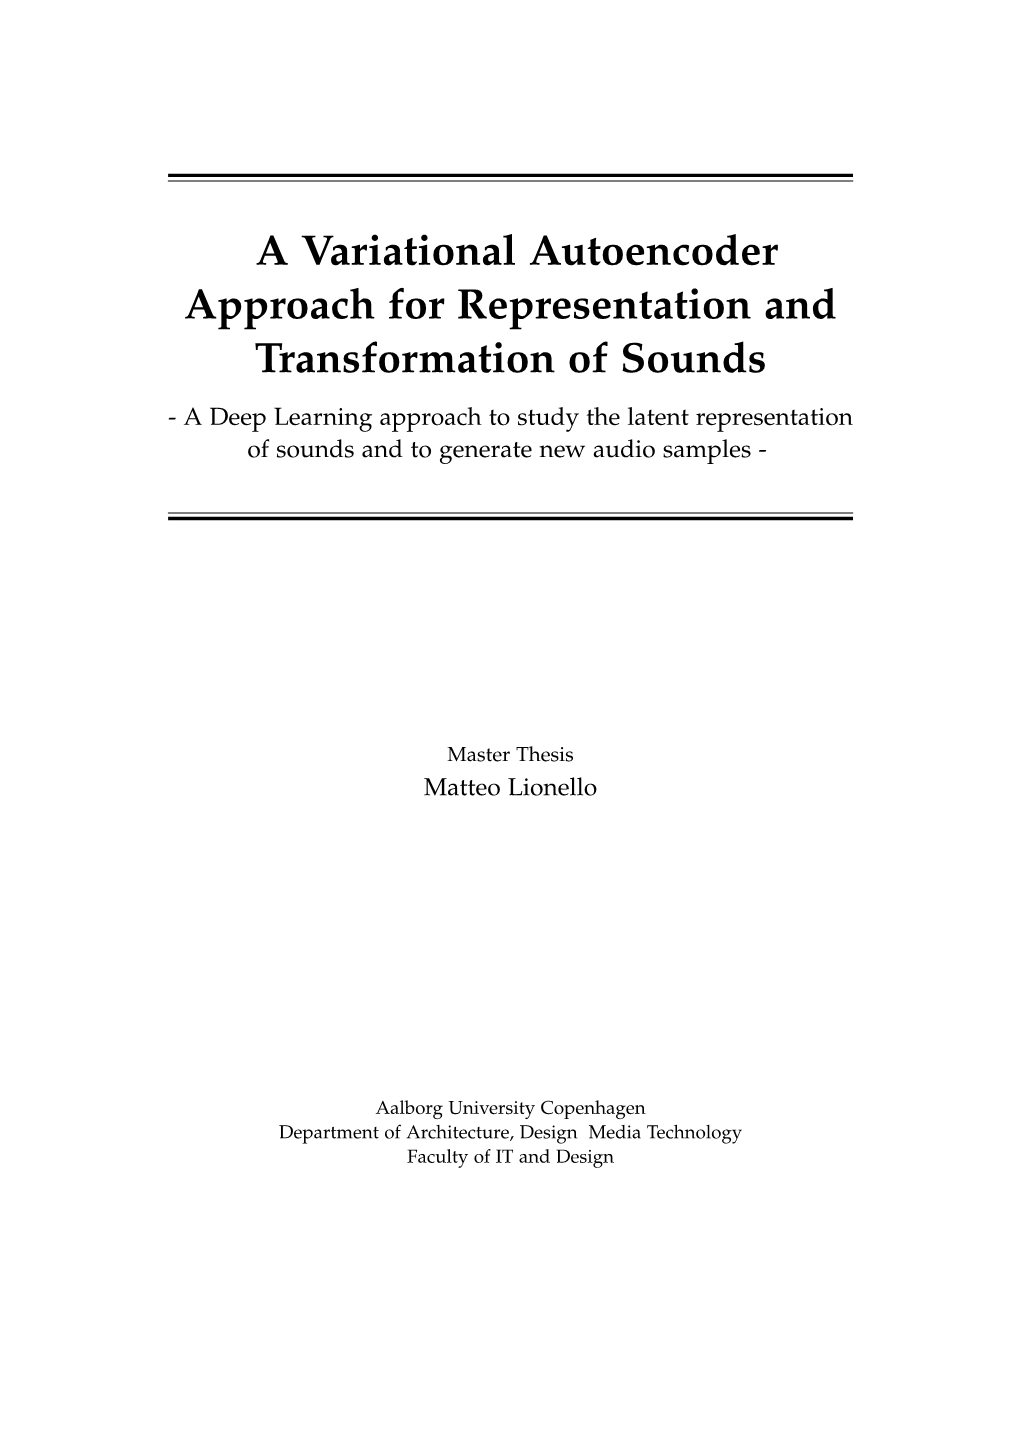 A Variational Autoencoder Approach for Representation And